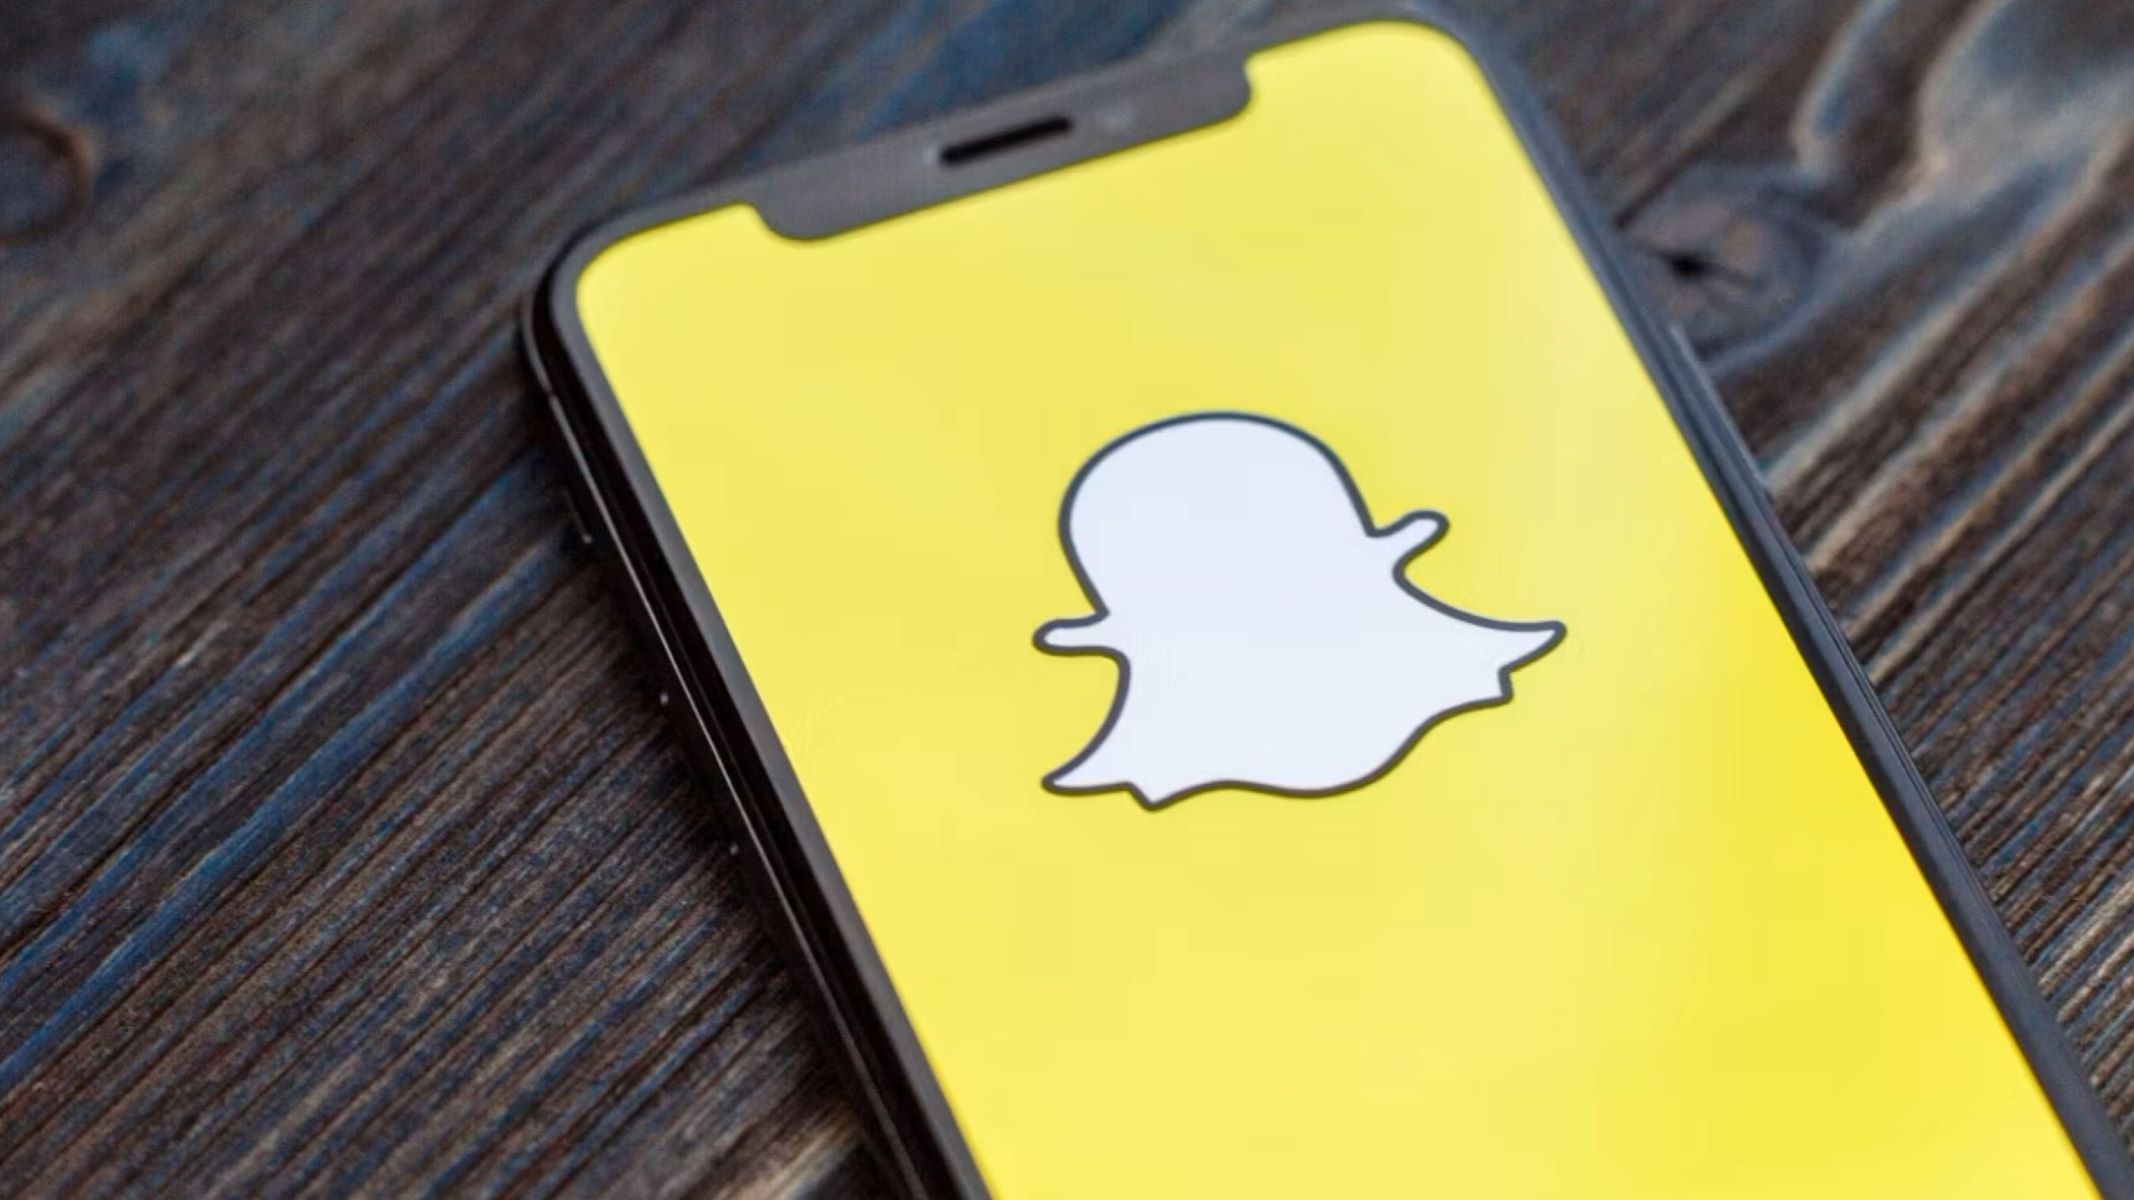 Saving Snapchat Stickers To Your Phone: Step-by-Step Guide